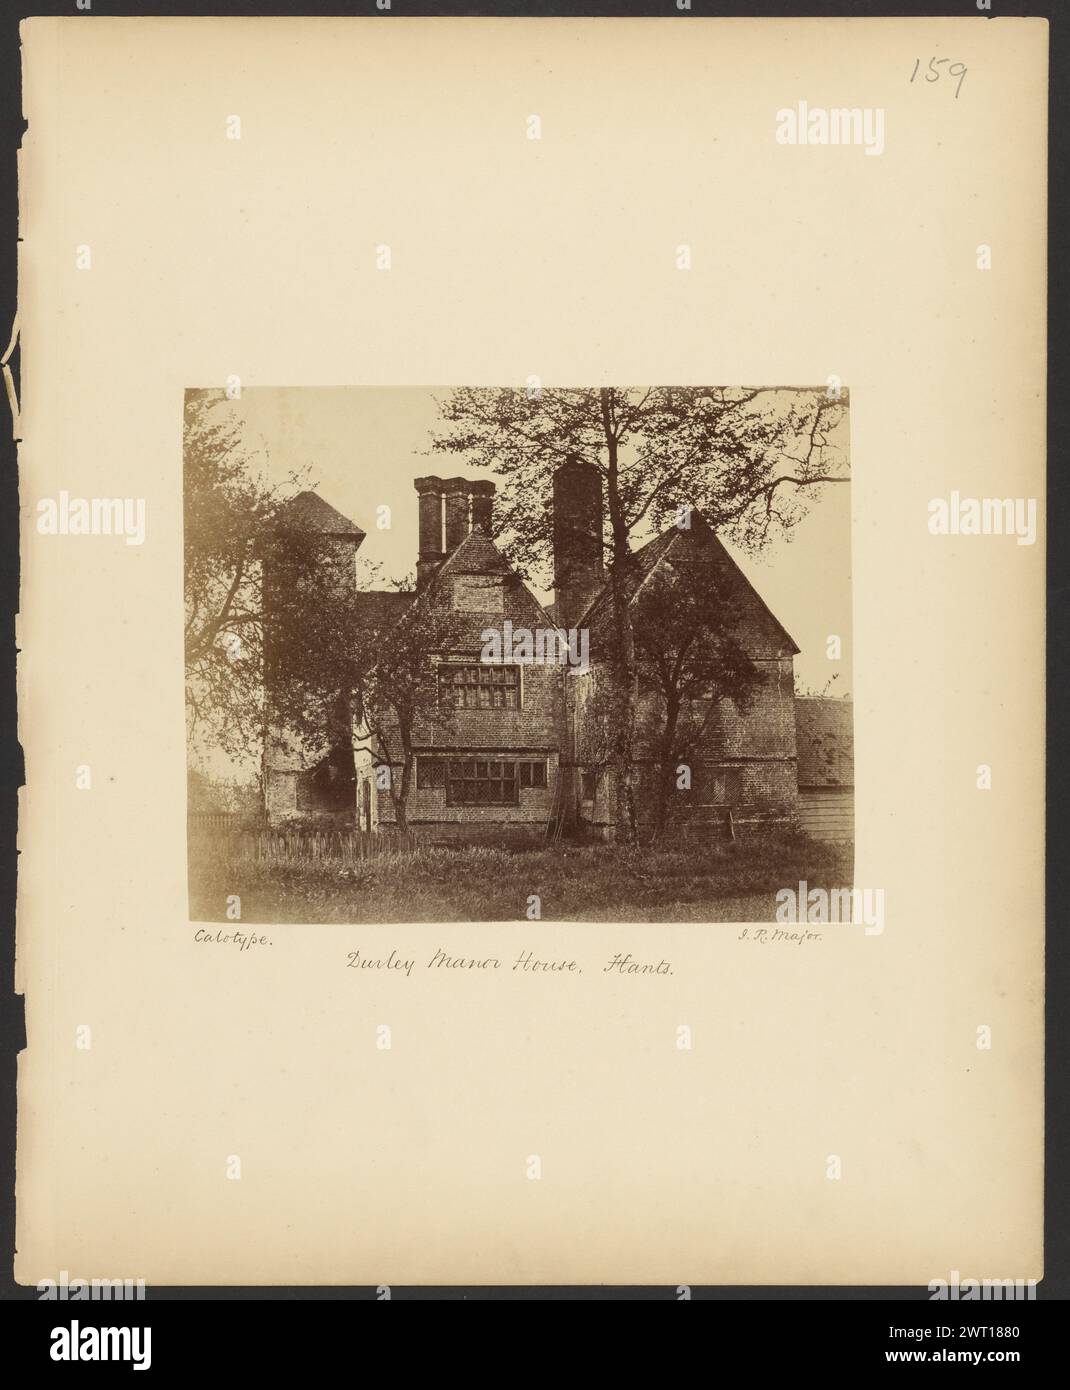 Durley Manor House, Hants. Reverend John Richardson Major, photographer (English, 1821 - 1871) 1854–1856 A brick manor house surrounded by trees. (Recto, mount) upper right, in pencil: '159'; Lower left, in black ink: 'Calotype'; Lower center, in black ink: 'Durley Manor House, Hants.'; Lower right, in black ink: 'J. R. Major.'; (Verso, mount) lower left, pencil: 'A15.119'; Stock Photo